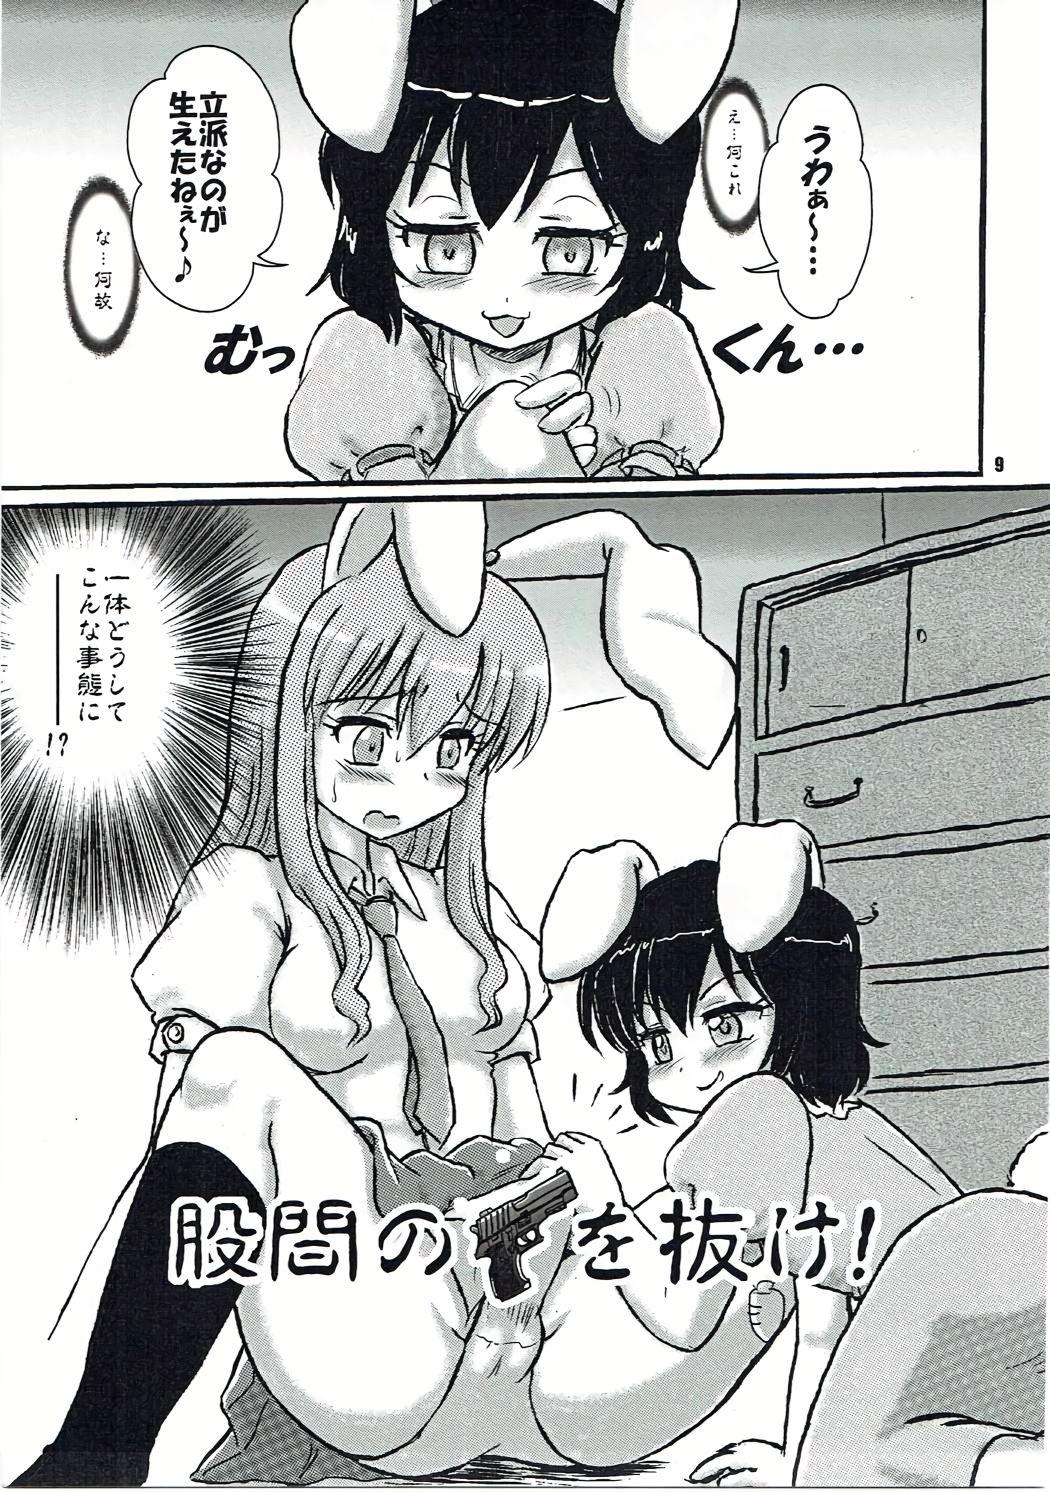 Oral Sex Touhou Shiro Shitagi - Panty Explosion of Rabbit. - Touhou project Red Head - Page 8